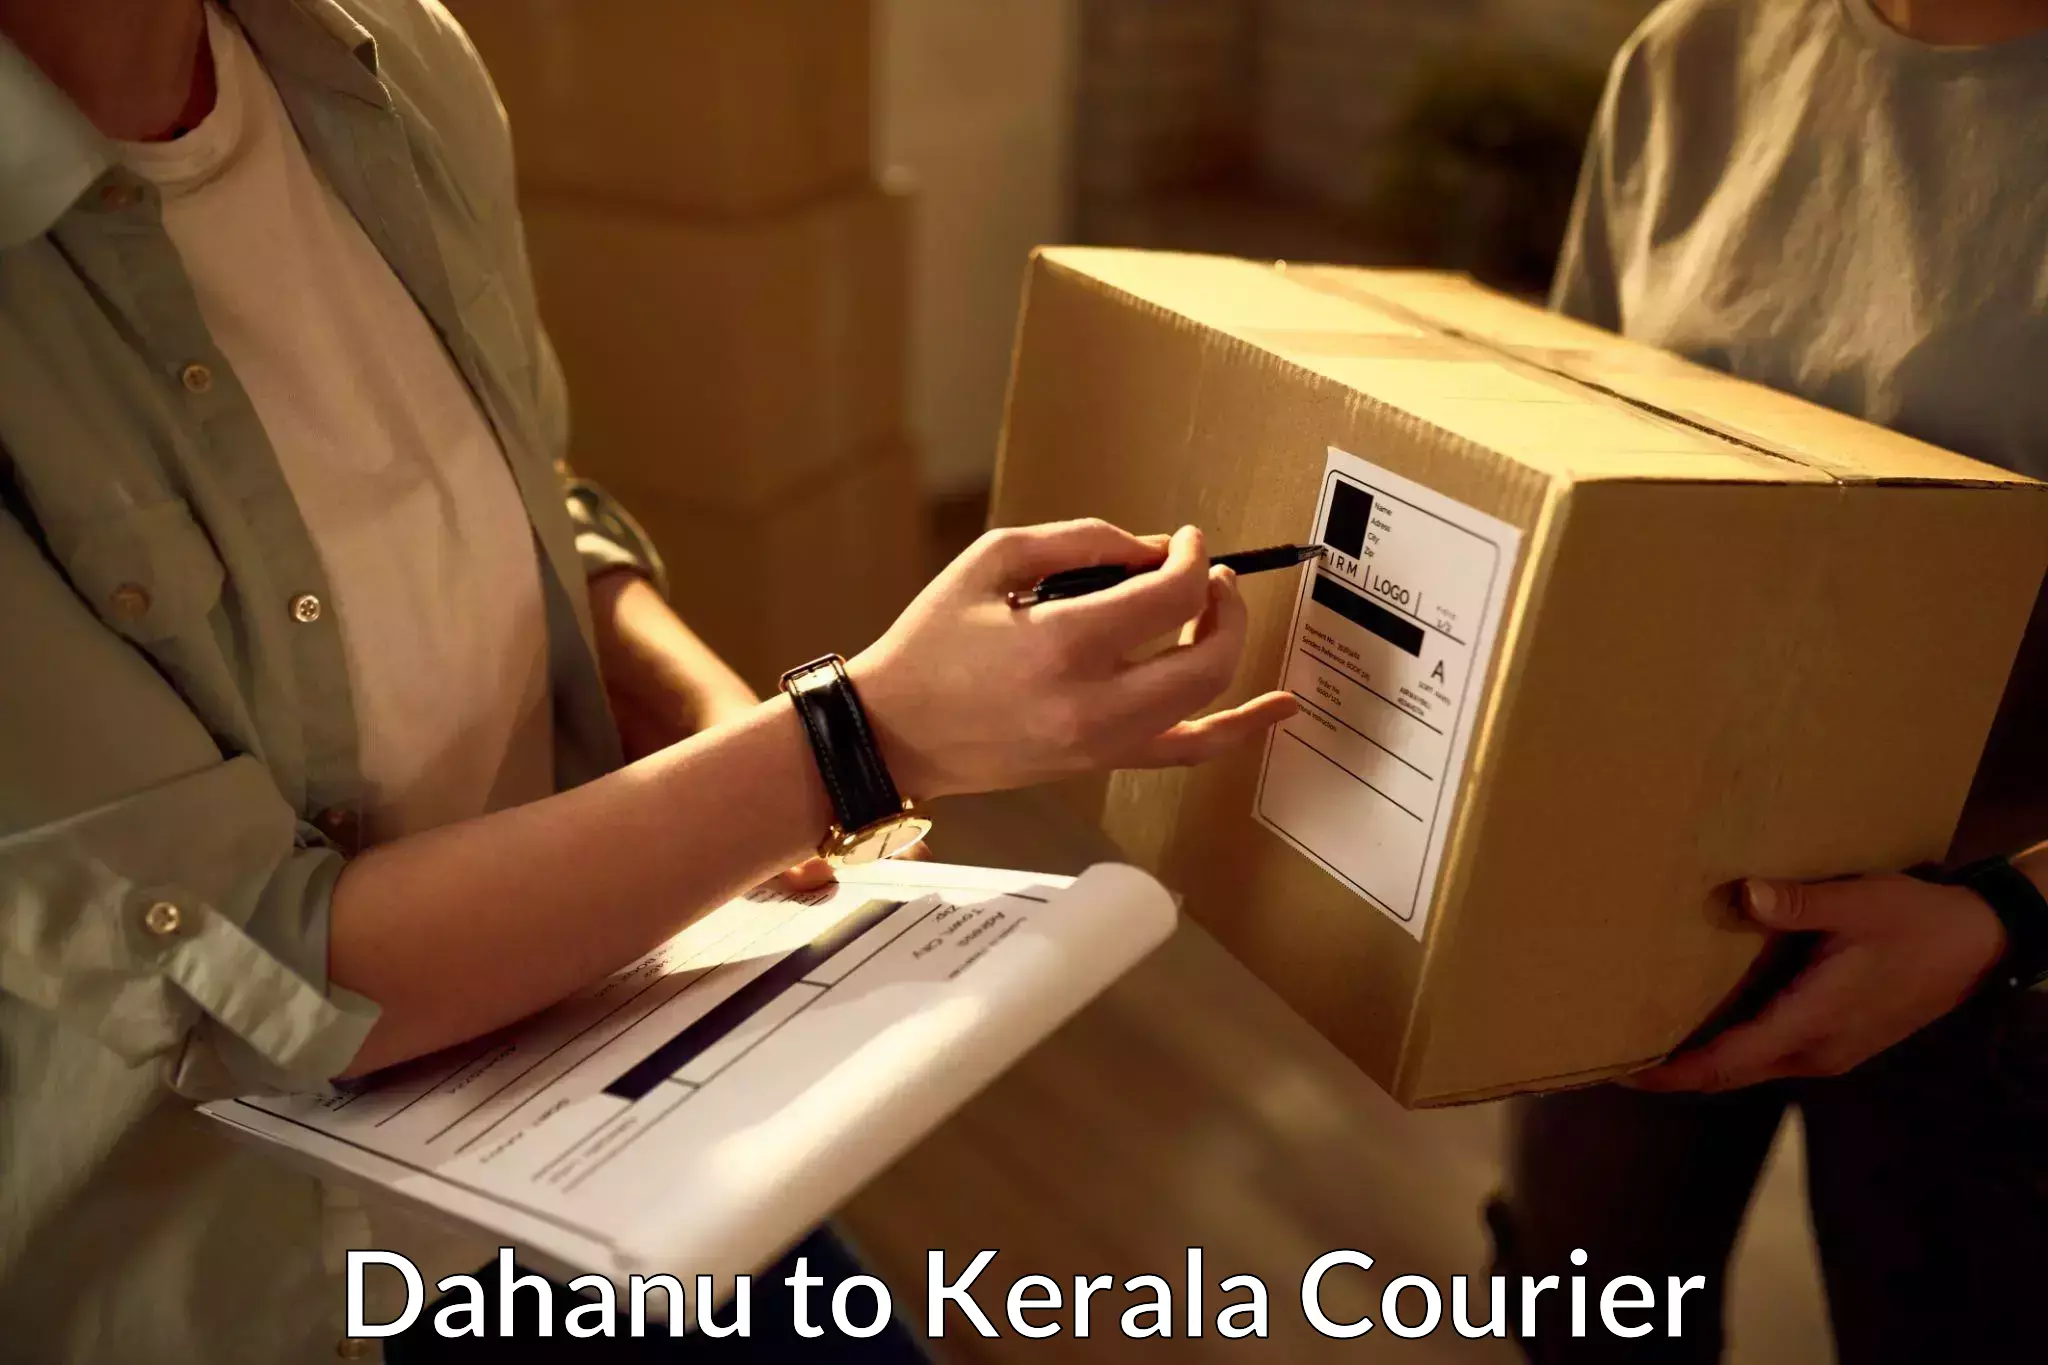 State-of-the-art courier technology Dahanu to Kerala